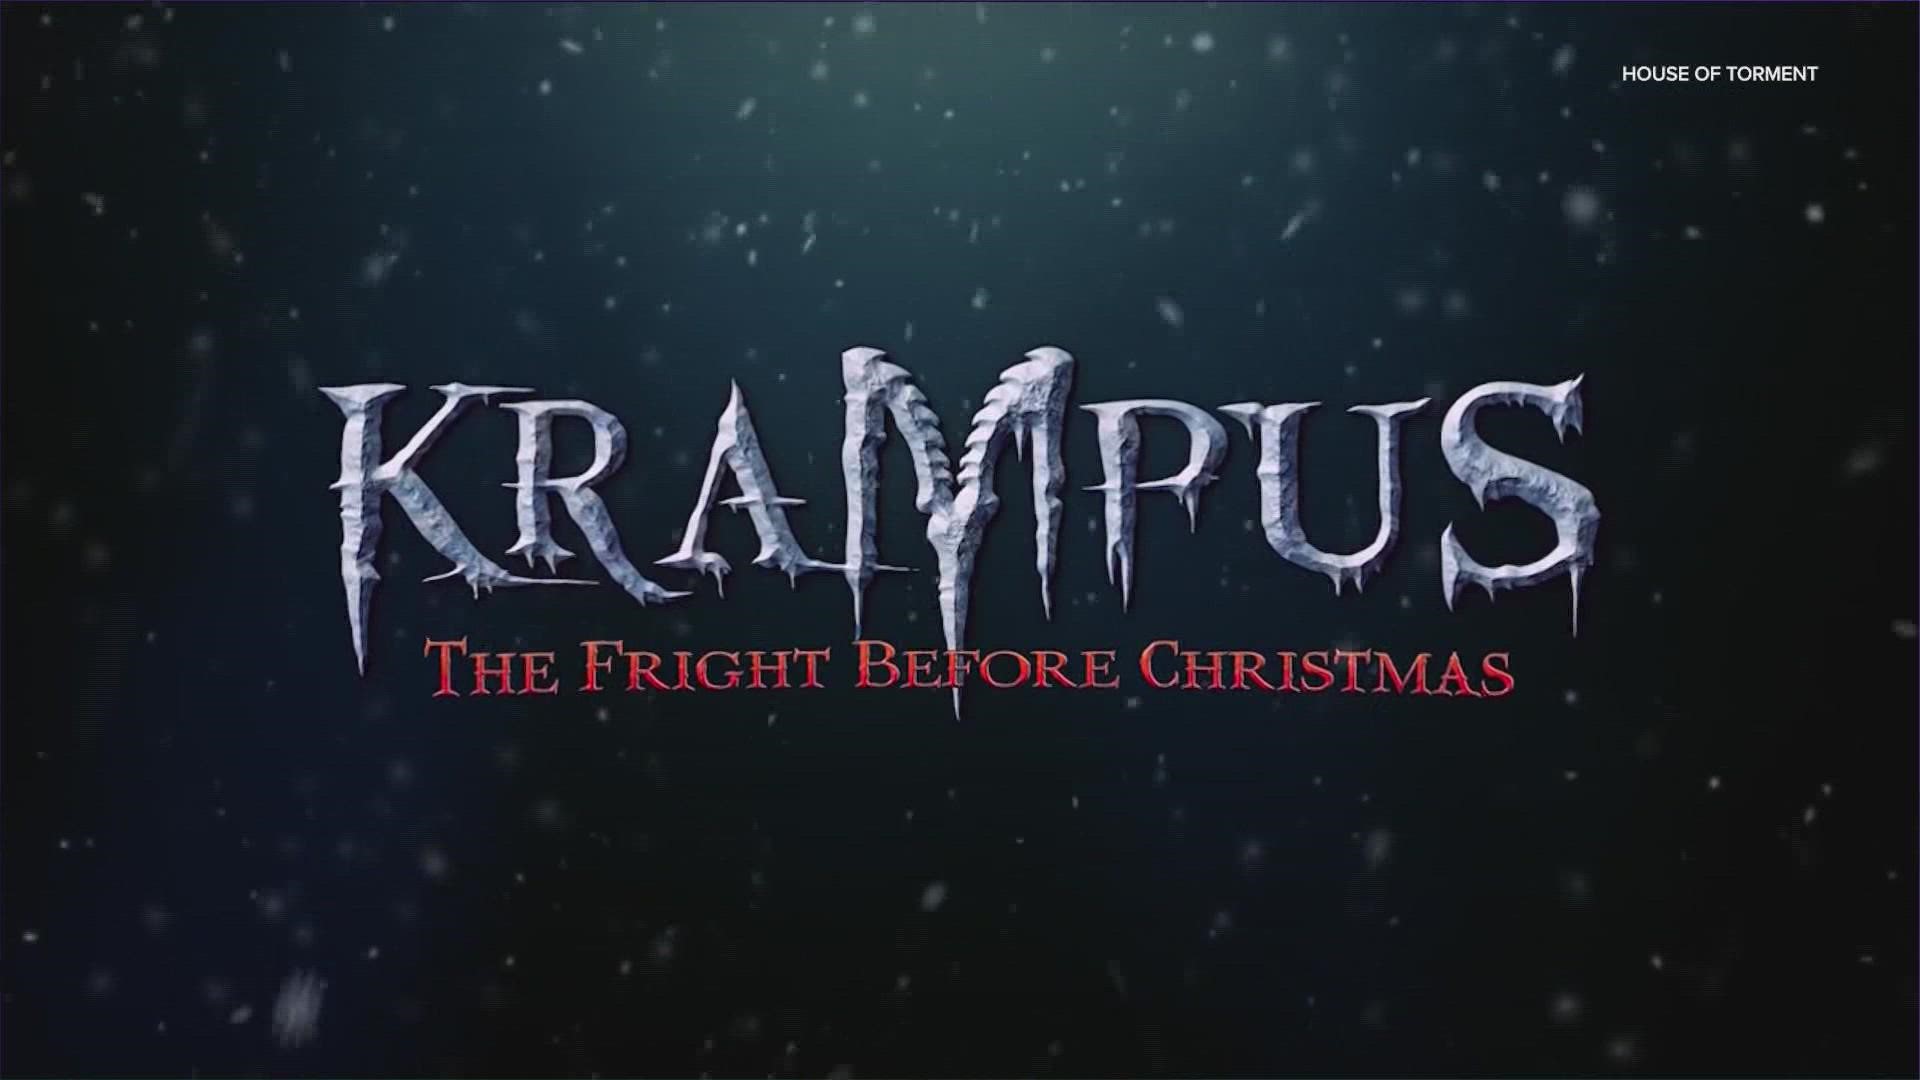 The Krampus-themed event is back for two days this month.